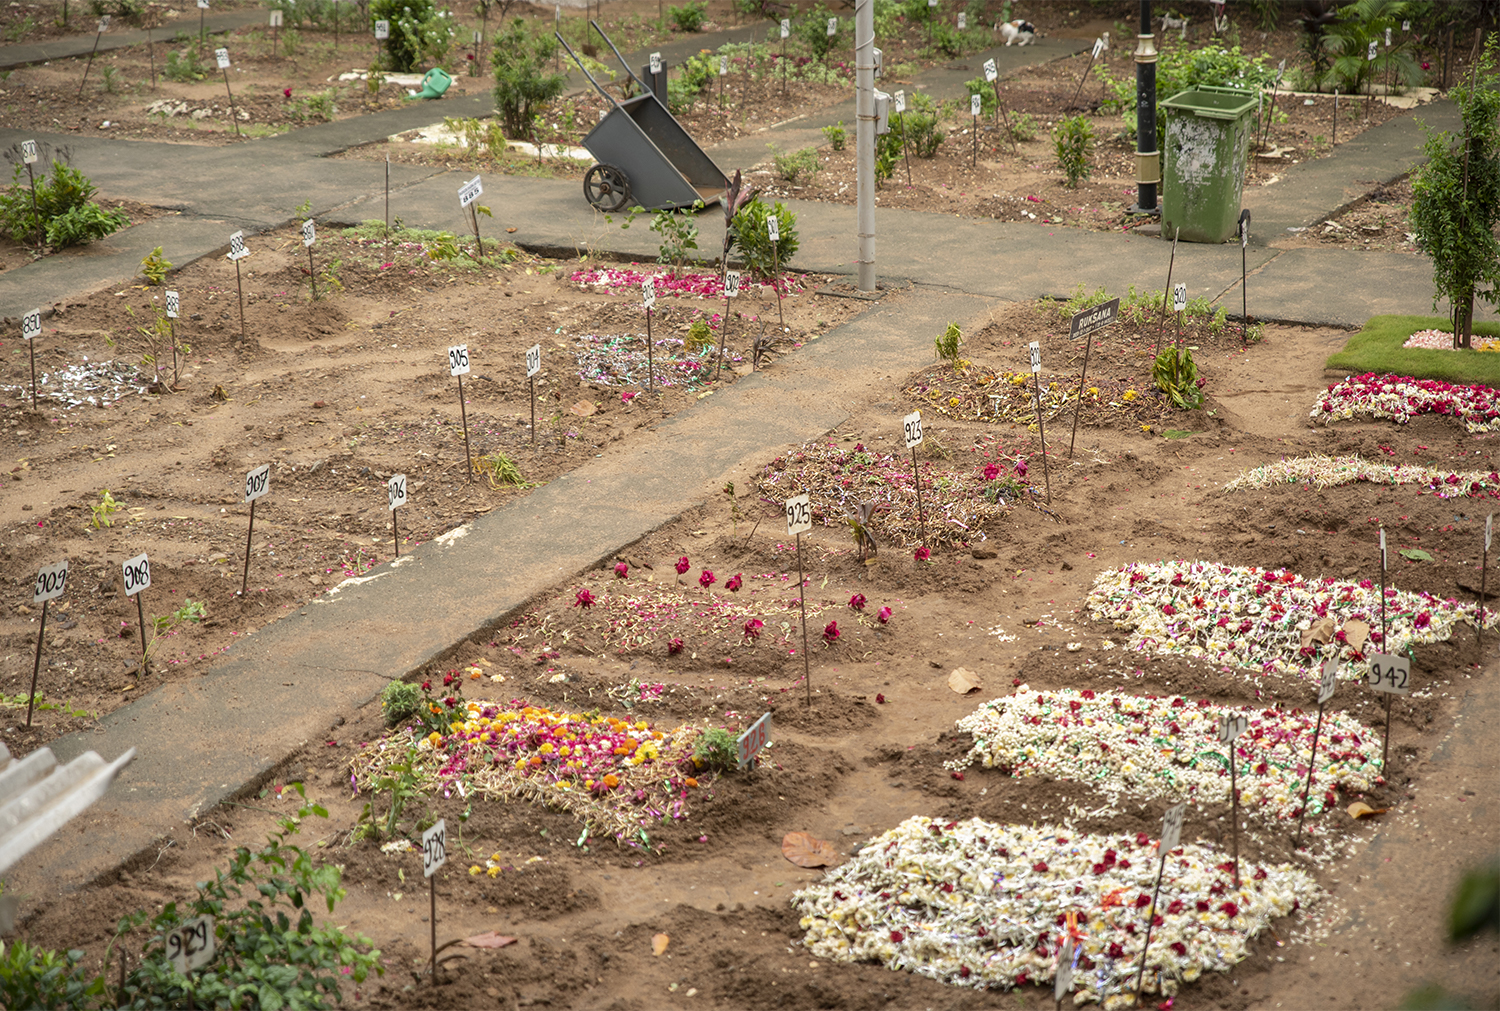 Cemetery workers struggle to keep up with Mumbai’s COVID-19 deaths